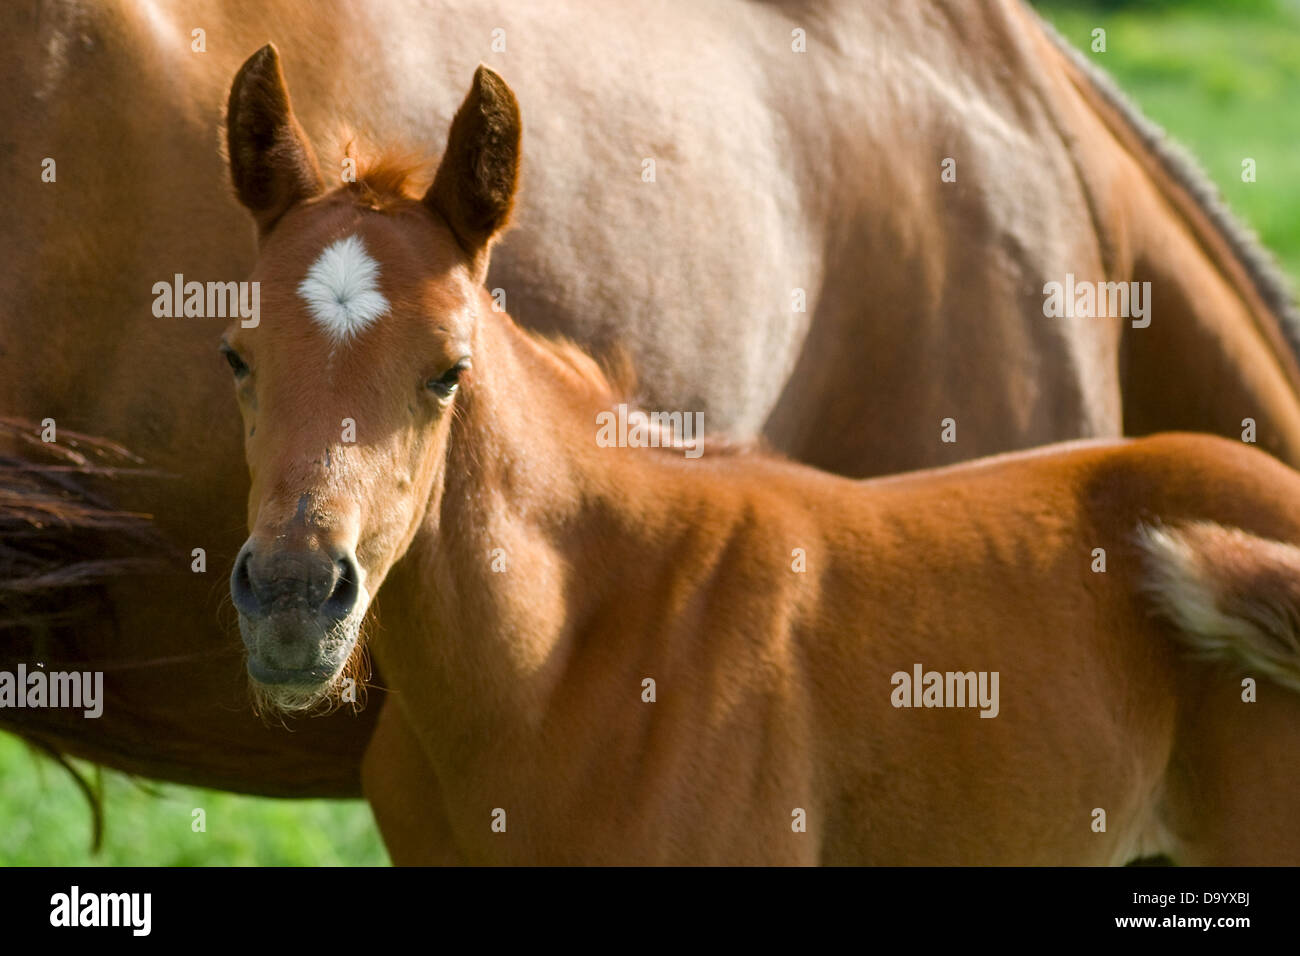 landscape with horses: mare and her foal on green grass Stock Photo